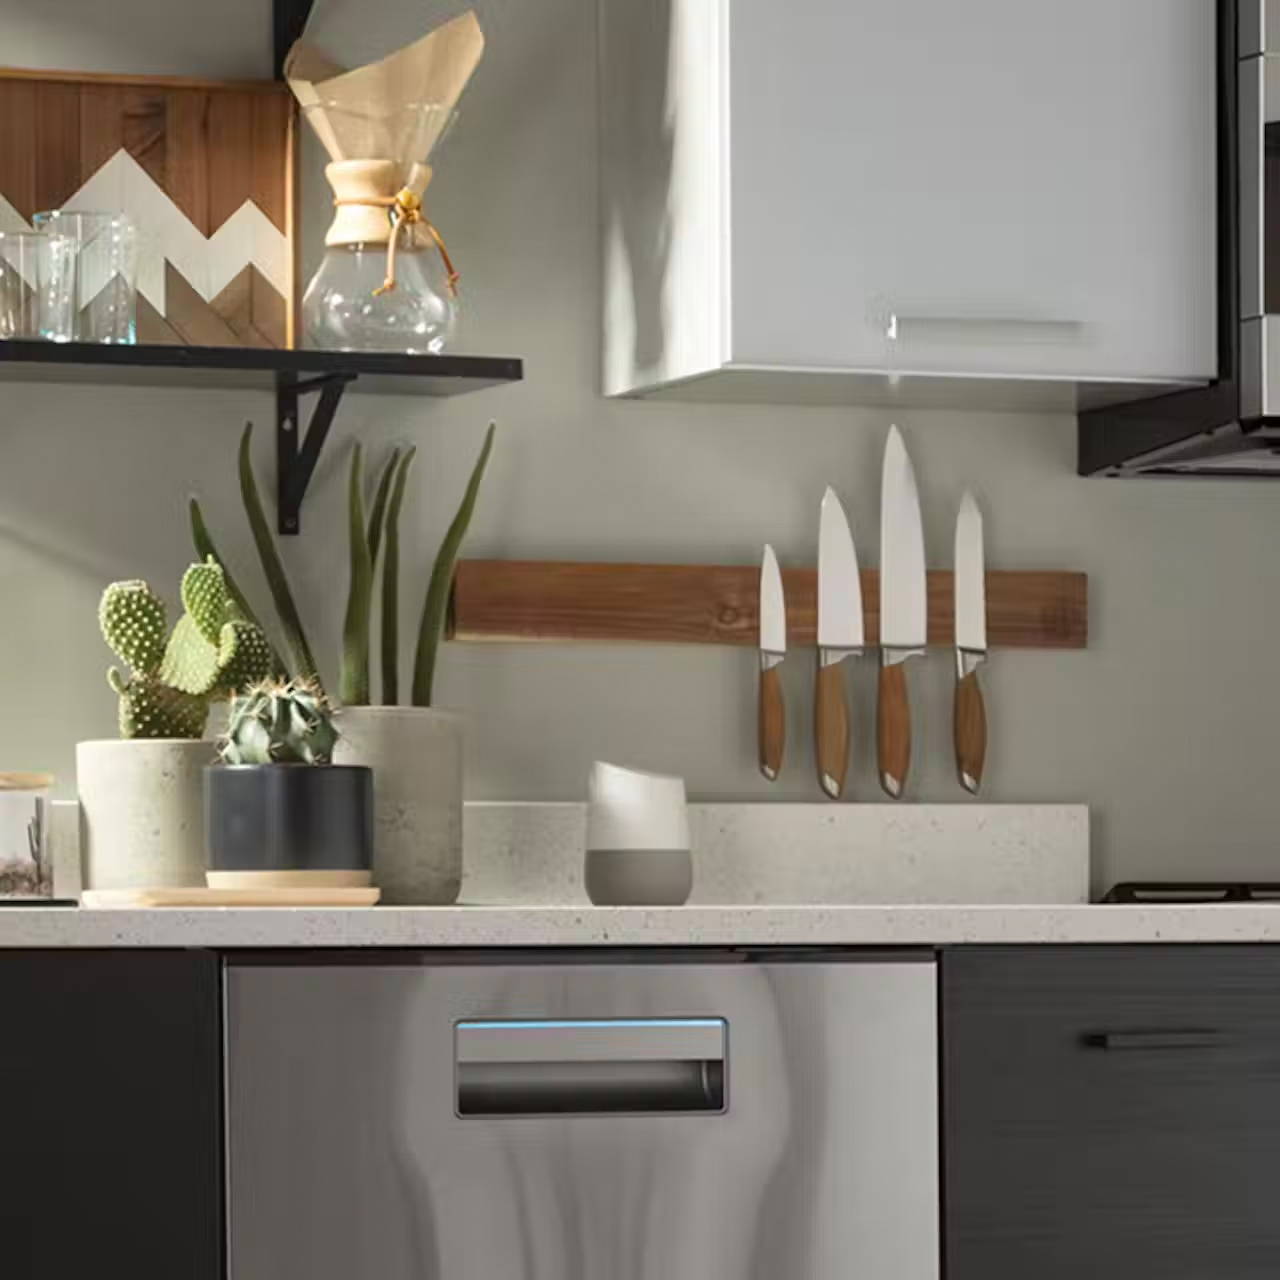 Modern kitchen countertop with Alexa and a Haier dishwasher below it.